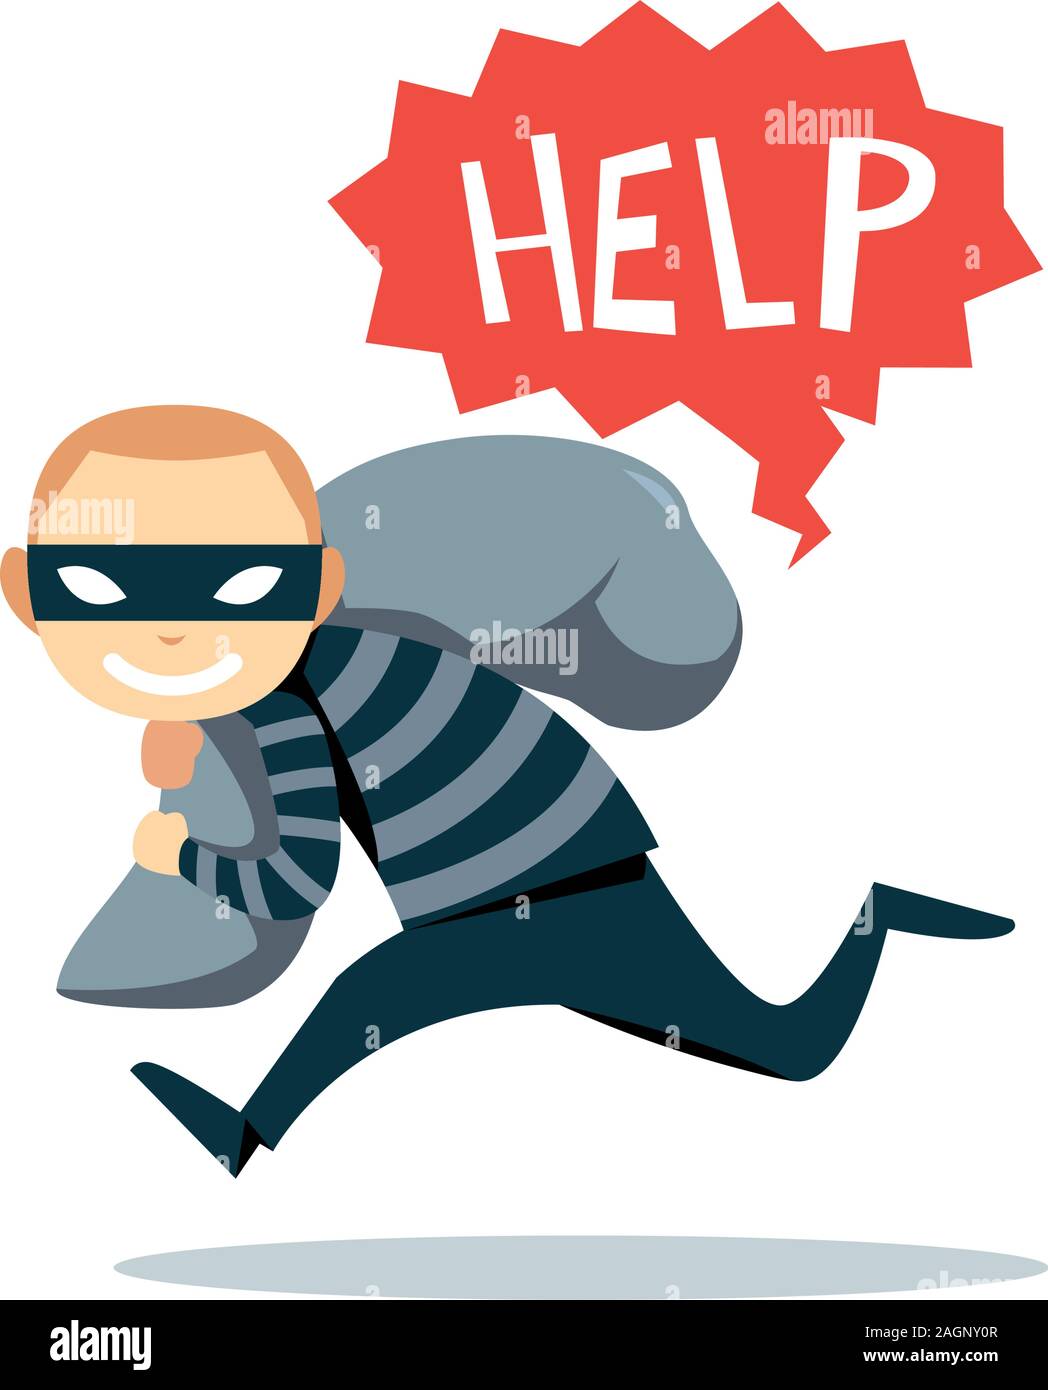 The Running Kidnapper with a person inside the sack. Stock Vector